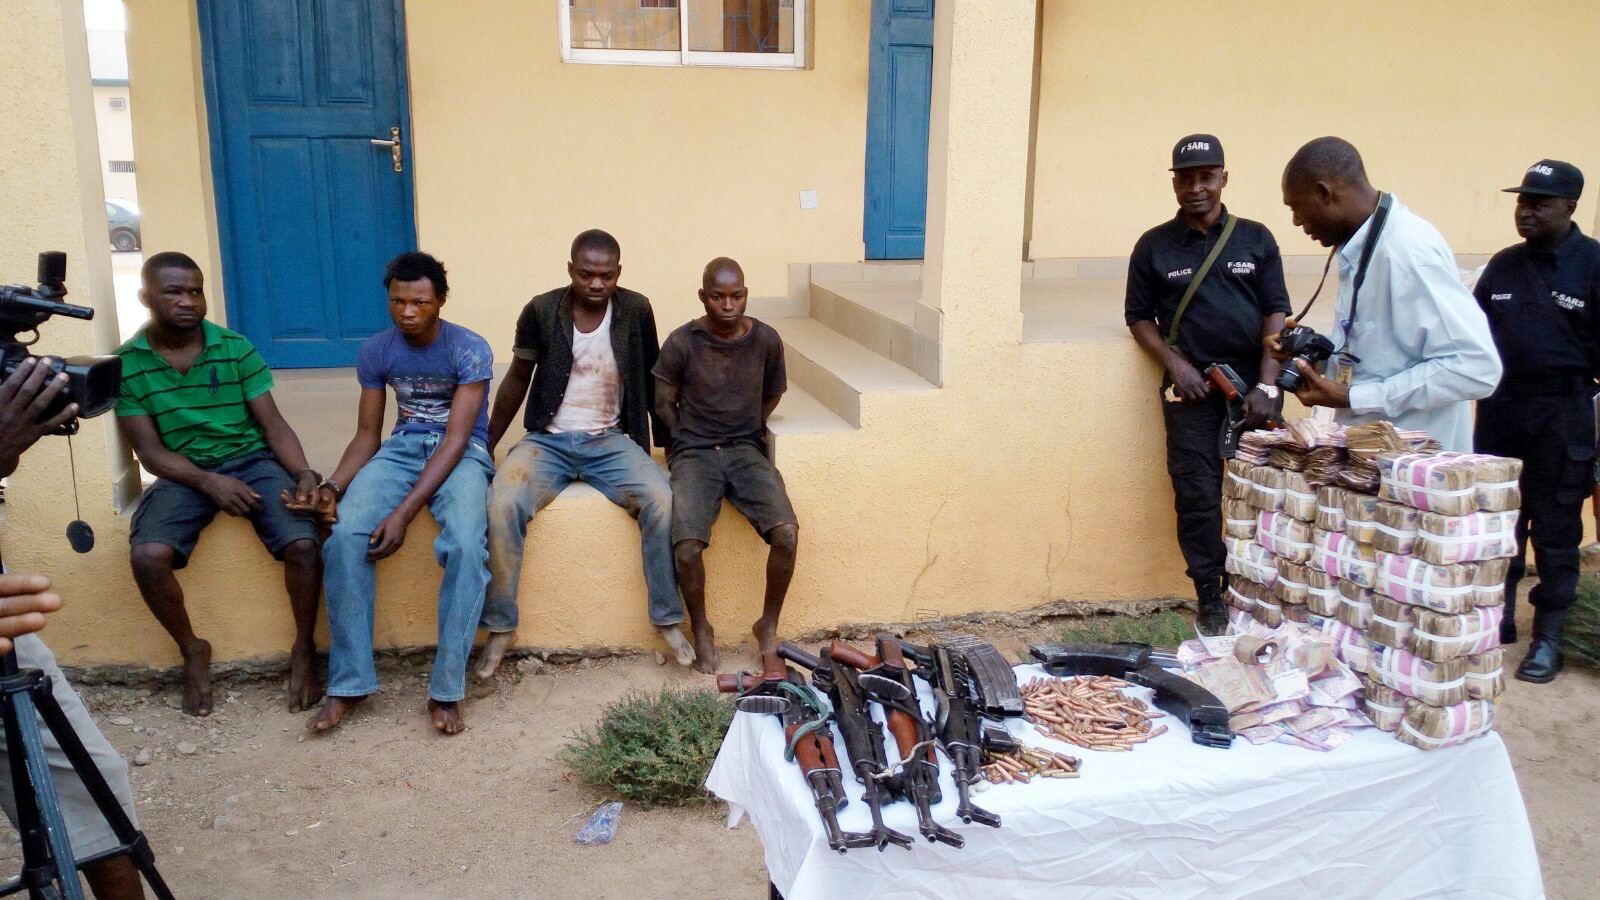 Police Recover N7,486,300 From Osun Robbery, Arrest 5 Armed Robbers [Photos]